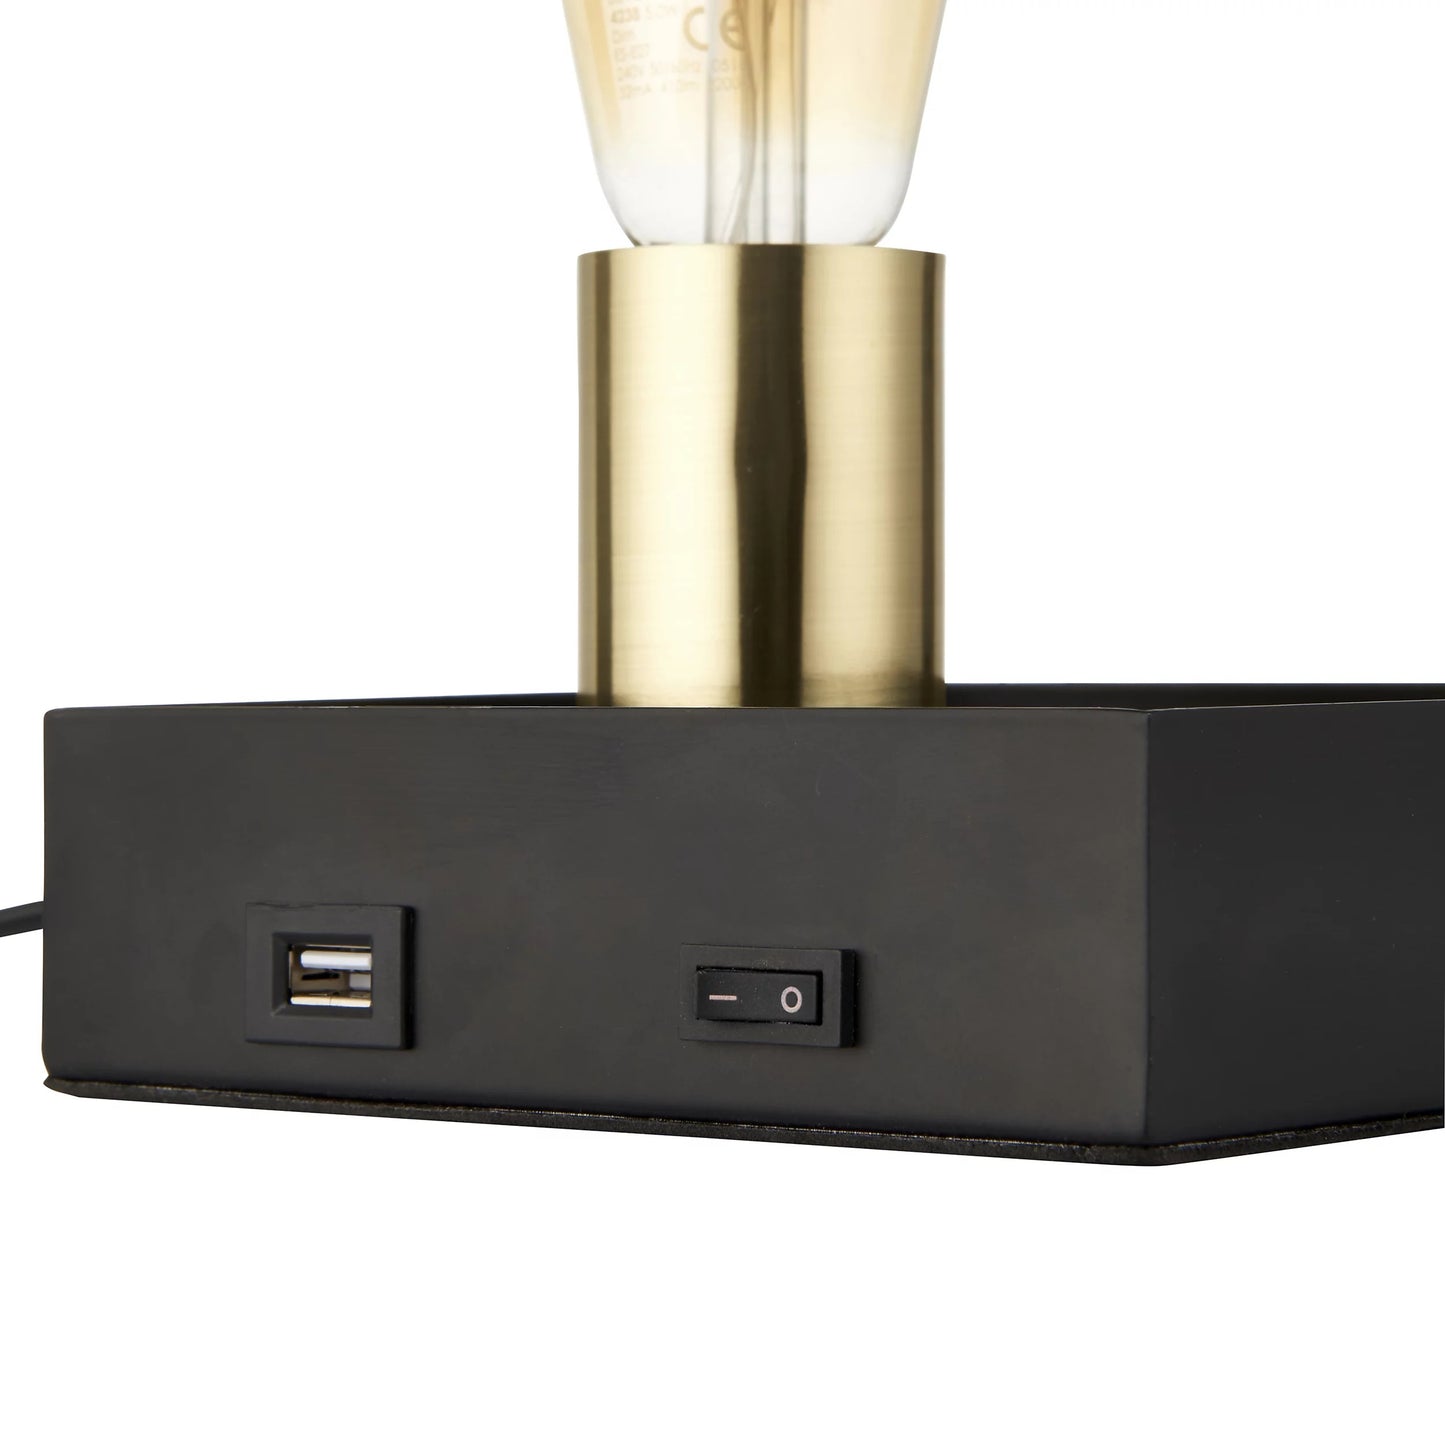 Key Square Table Lamp with USB Charging sockey Black and Satin Gold Effect